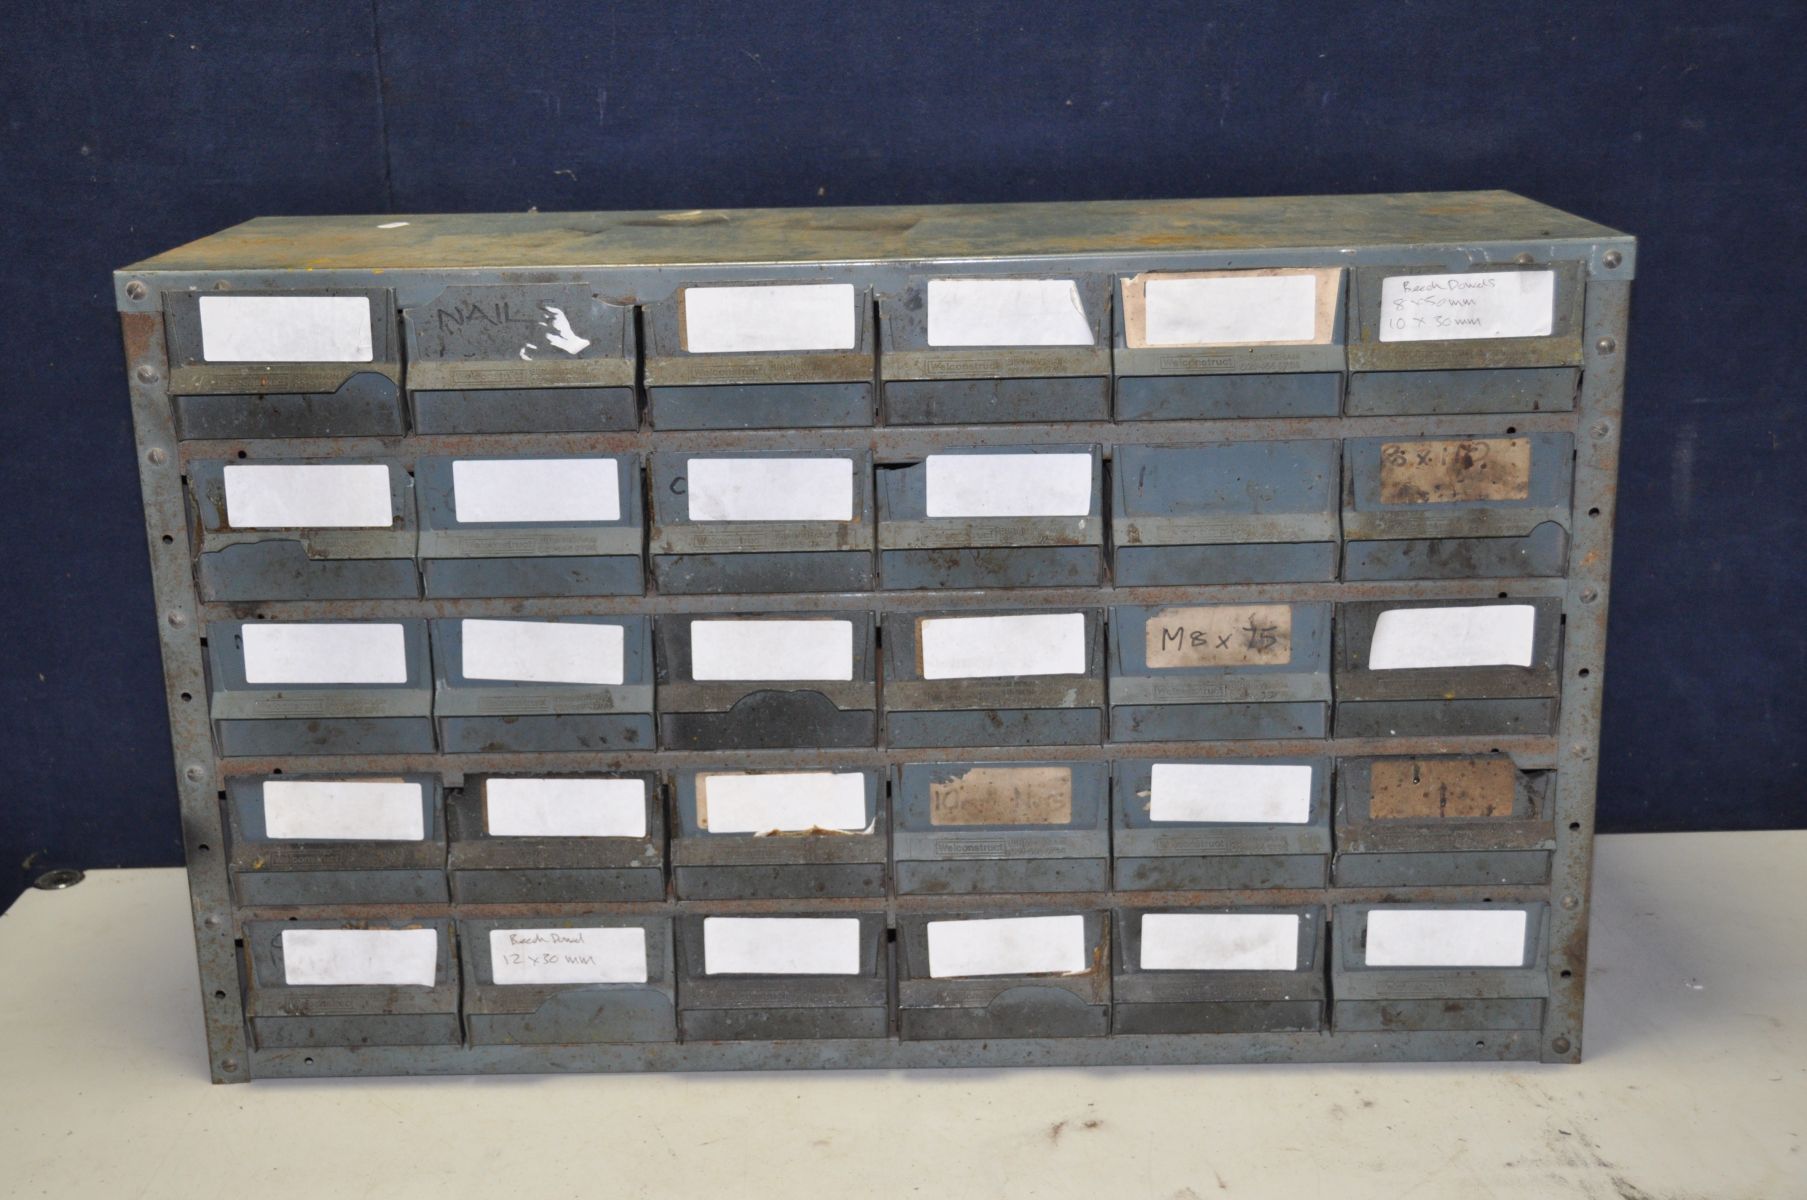 AN INDUSTRIAL METAL WORKSHOP DRAWER UNIT with thirty plastic 'Well construct' drawers , width 90cm